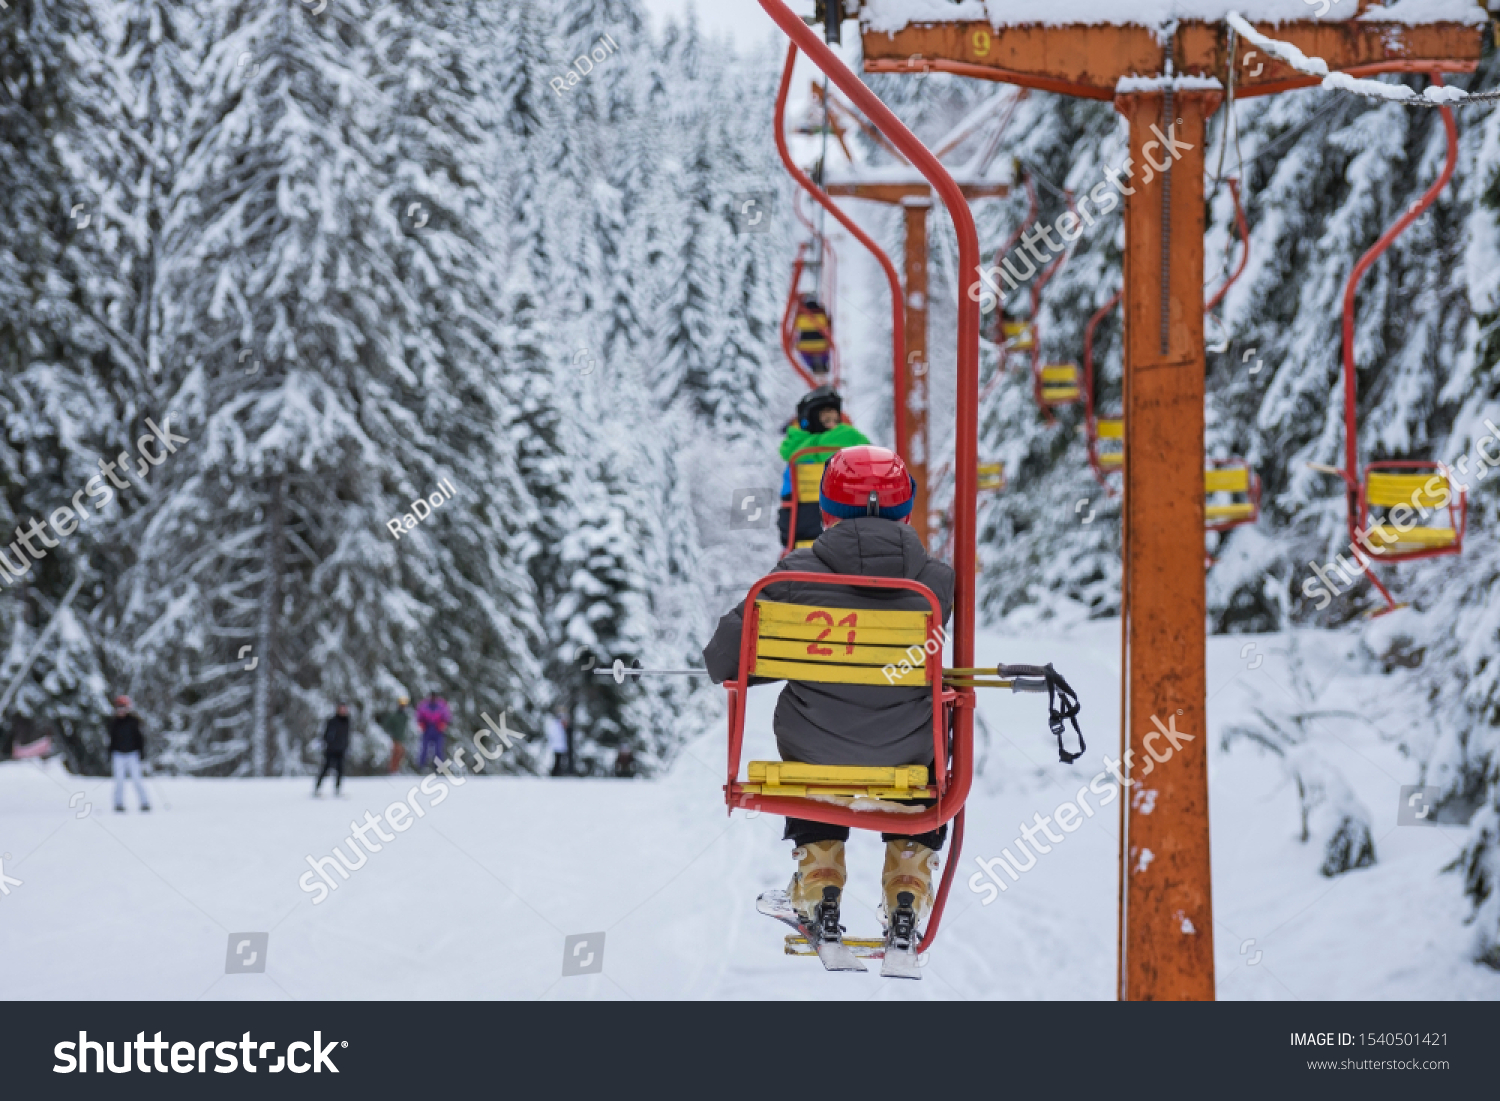 Skiers are sitting at old fashioned one chair ski lift.  Chair ski lift next to slope for skis and snowboards.  Ski area in snowy high mountain. Sports and recreation concept. Selective focus. #1540501421